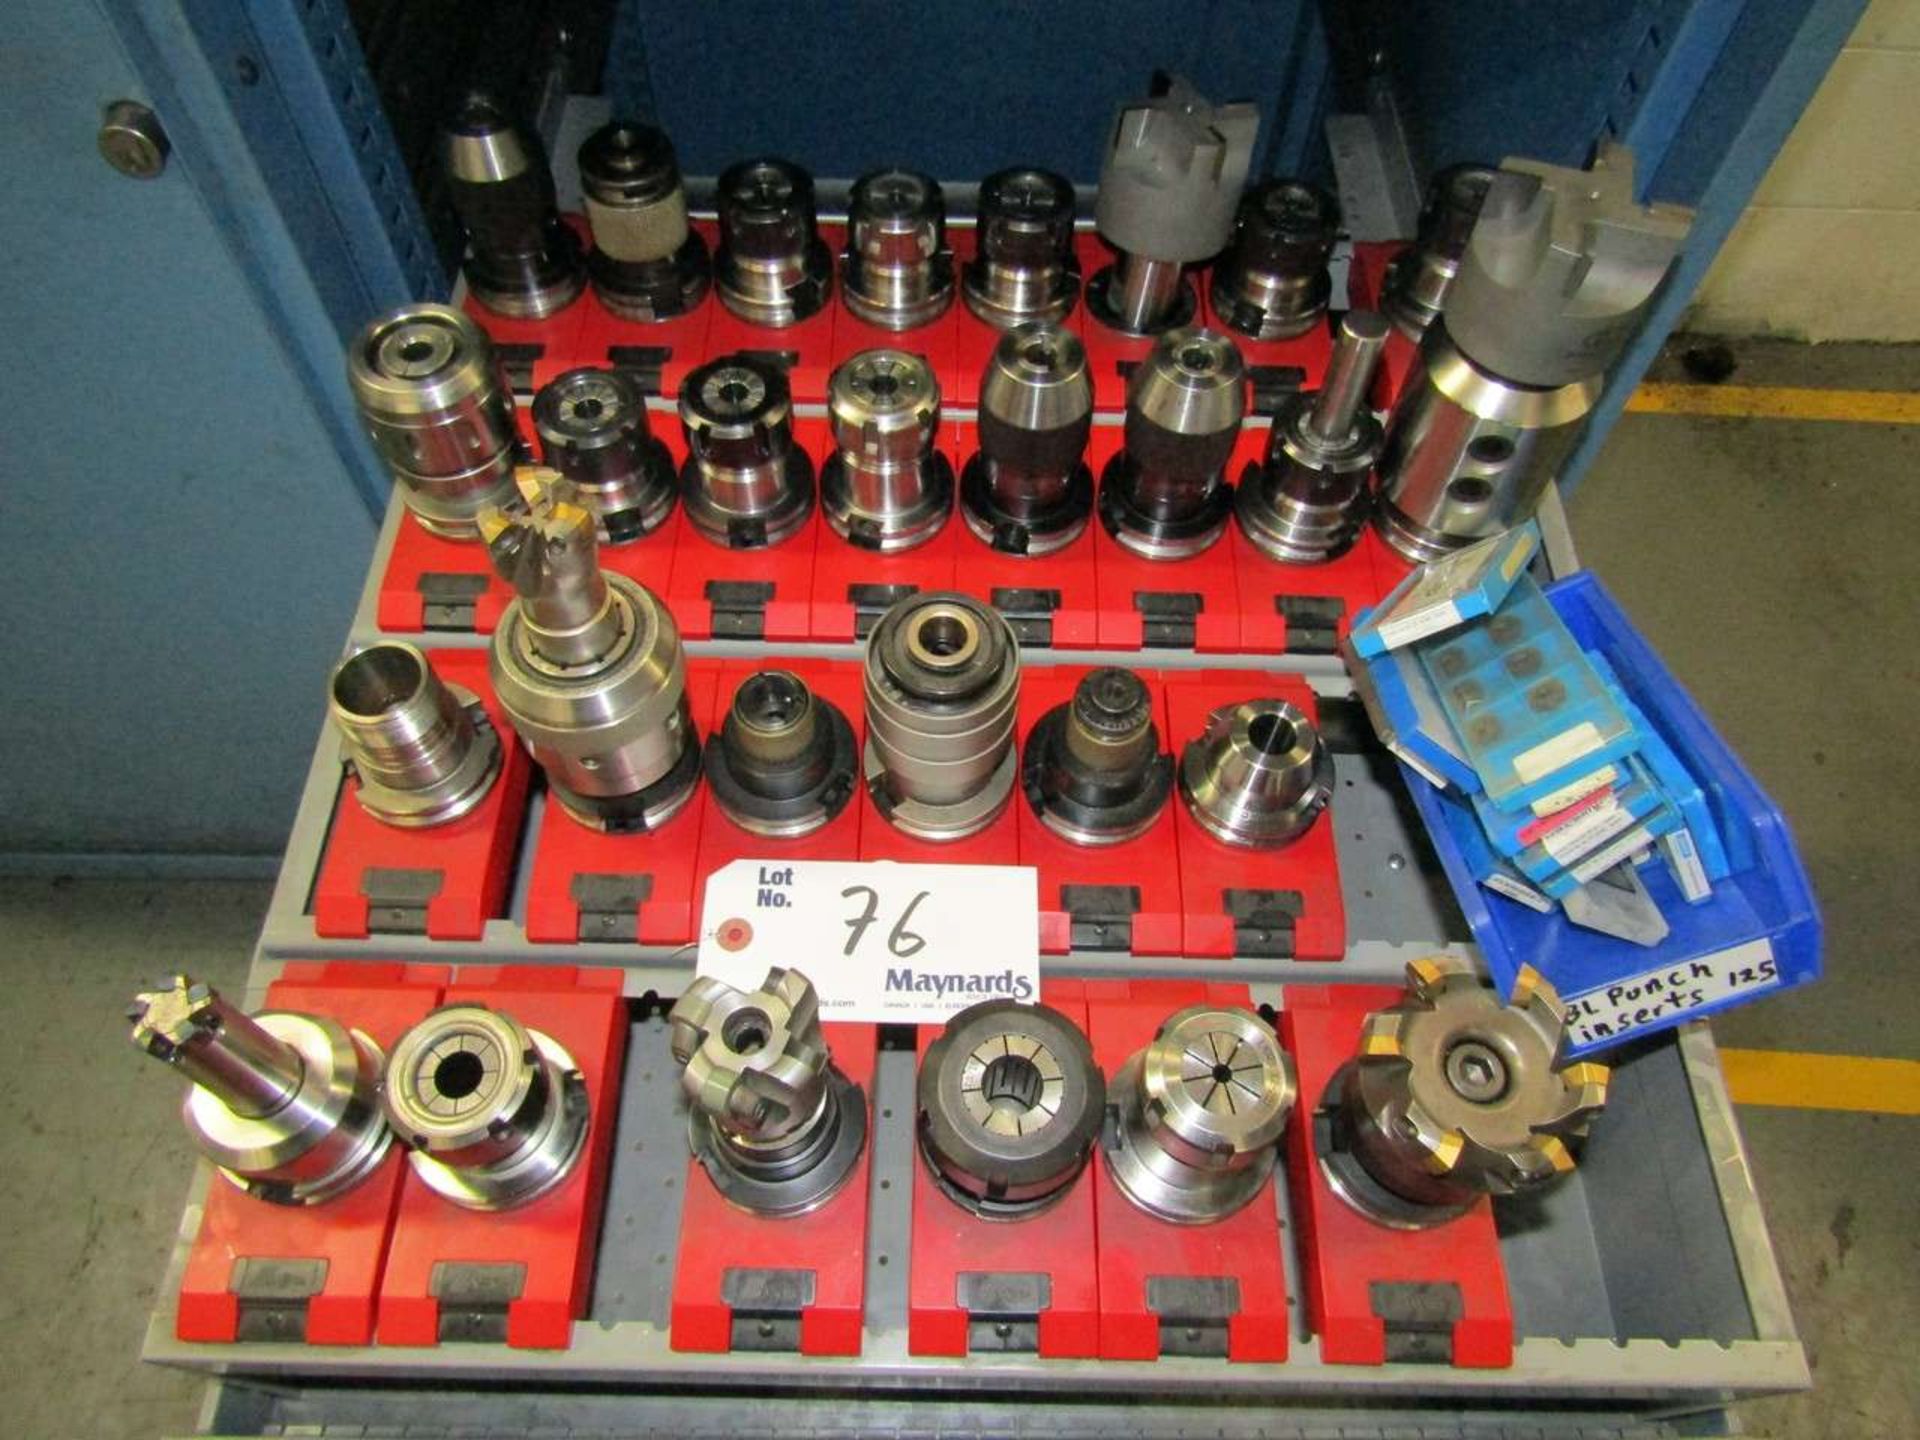 2 Drawers of Cutters and Spindle Holders for Milling Machine